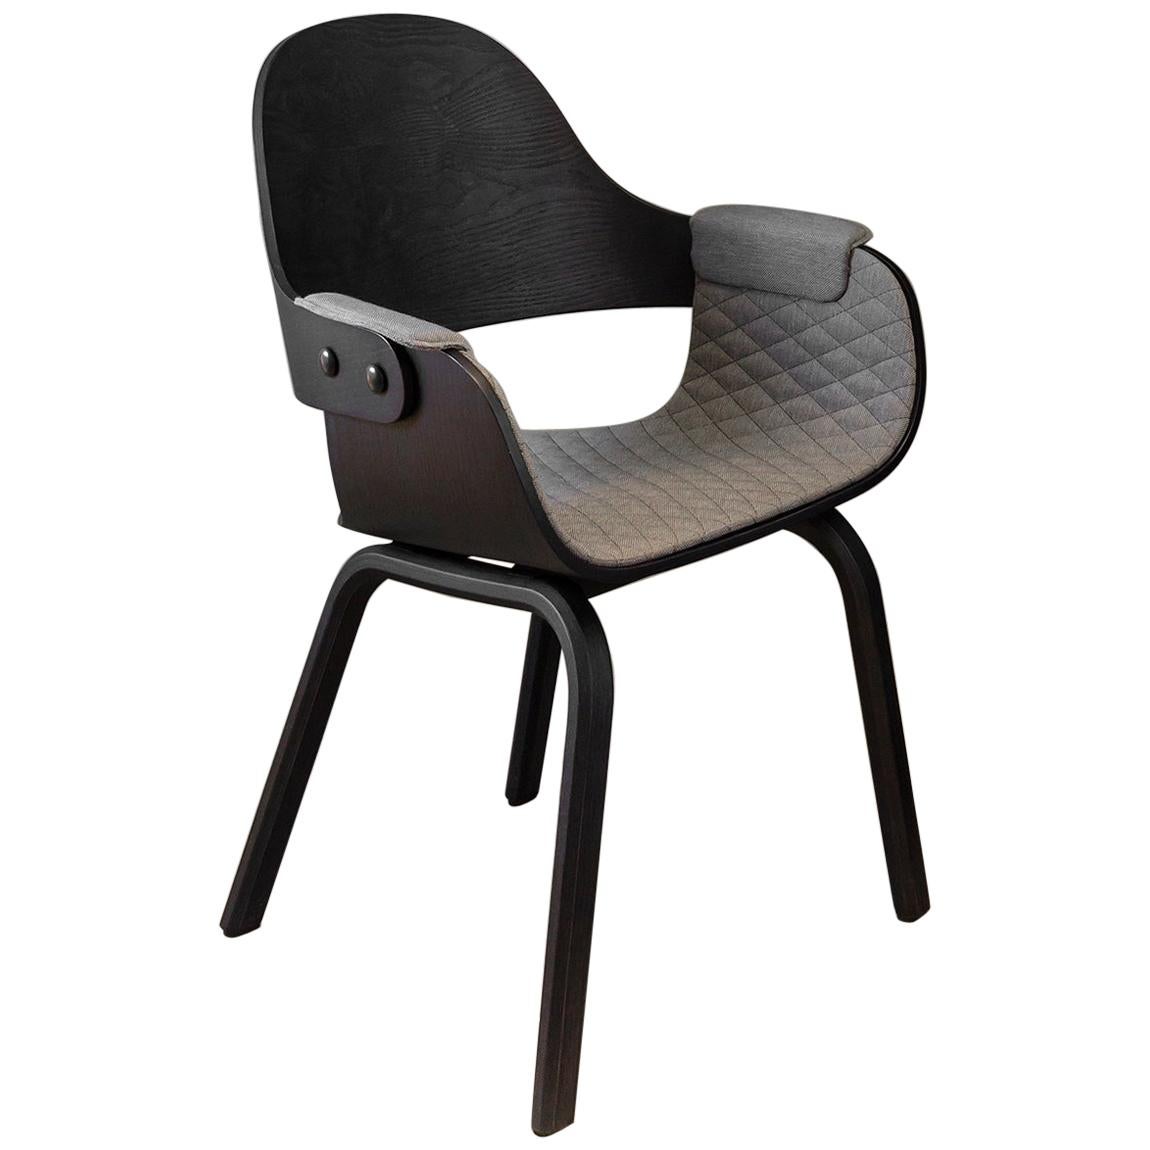 Showtime chair by Jaime Hayon contemporary office or dining chair black stained